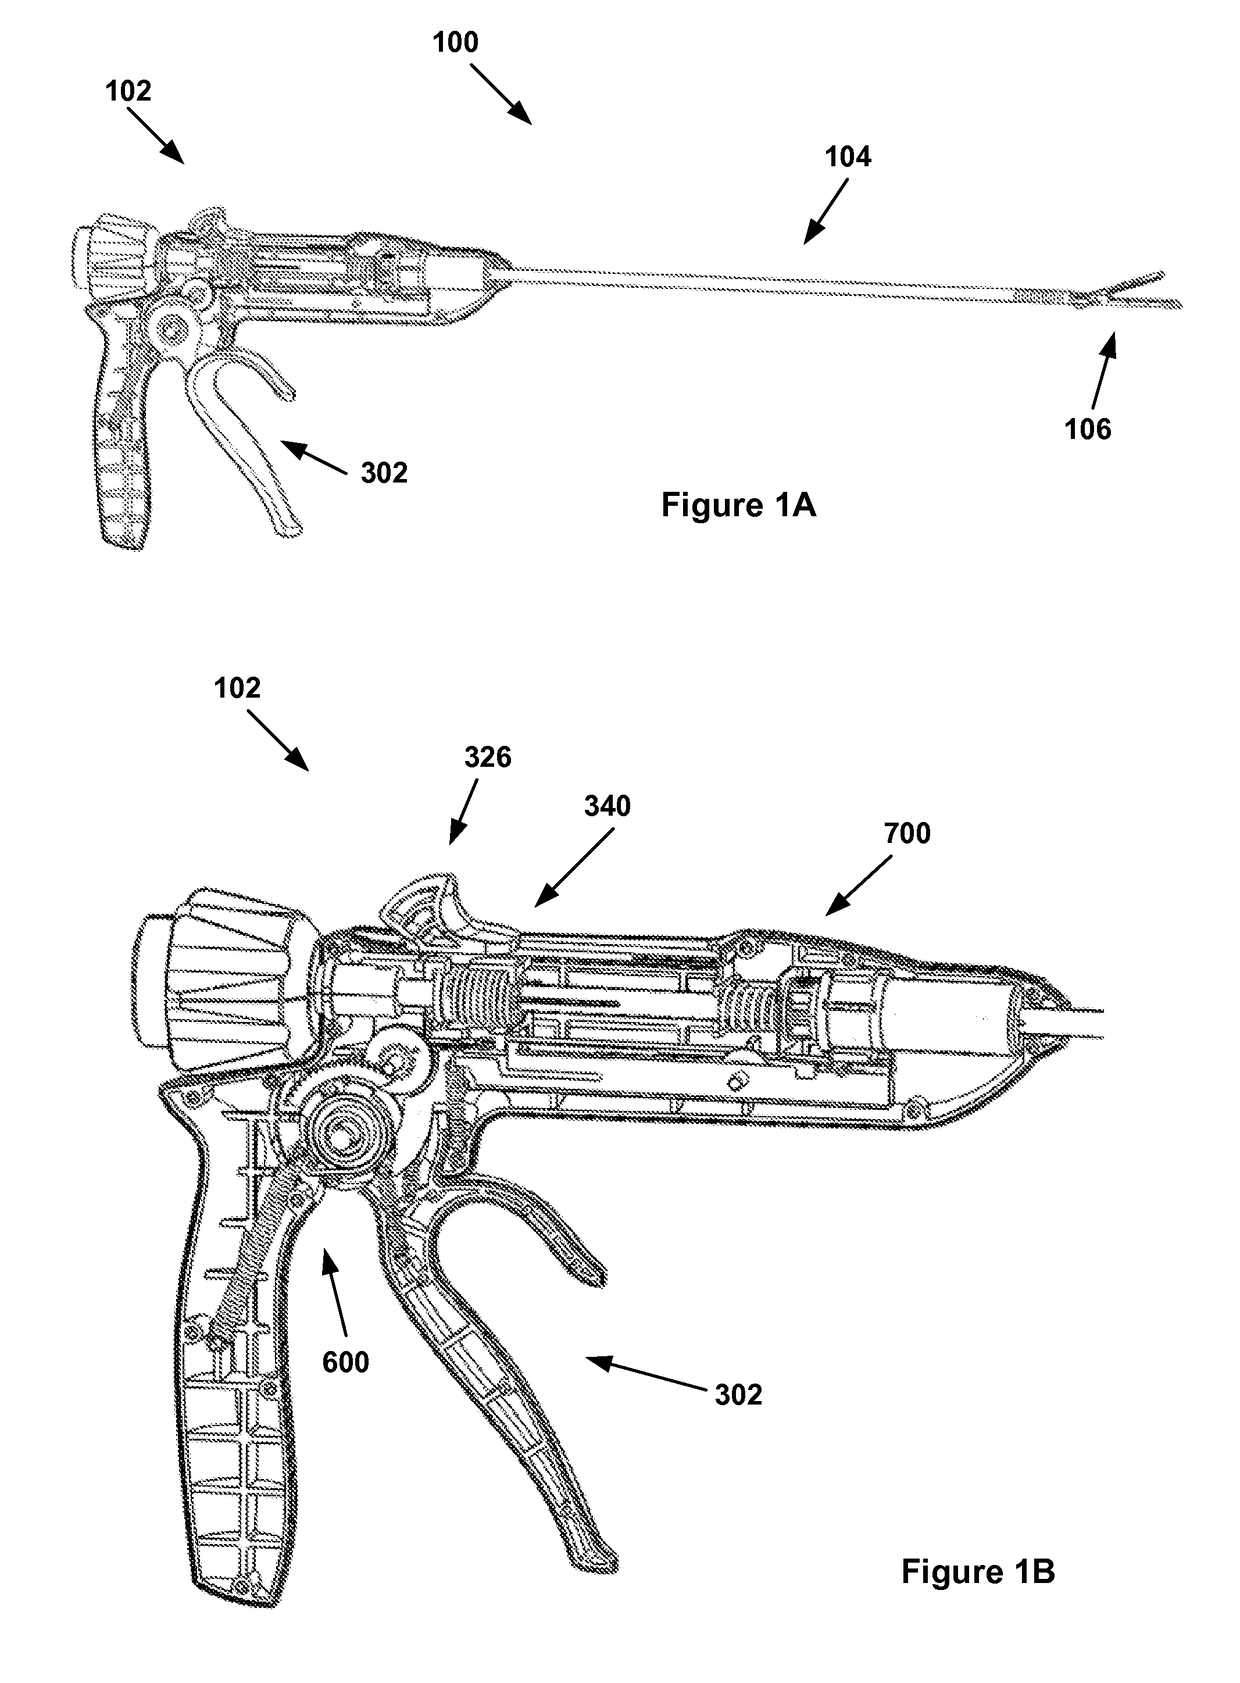 Surgical stapling and cutting apparatus, clamp mechanisms, systems and methods